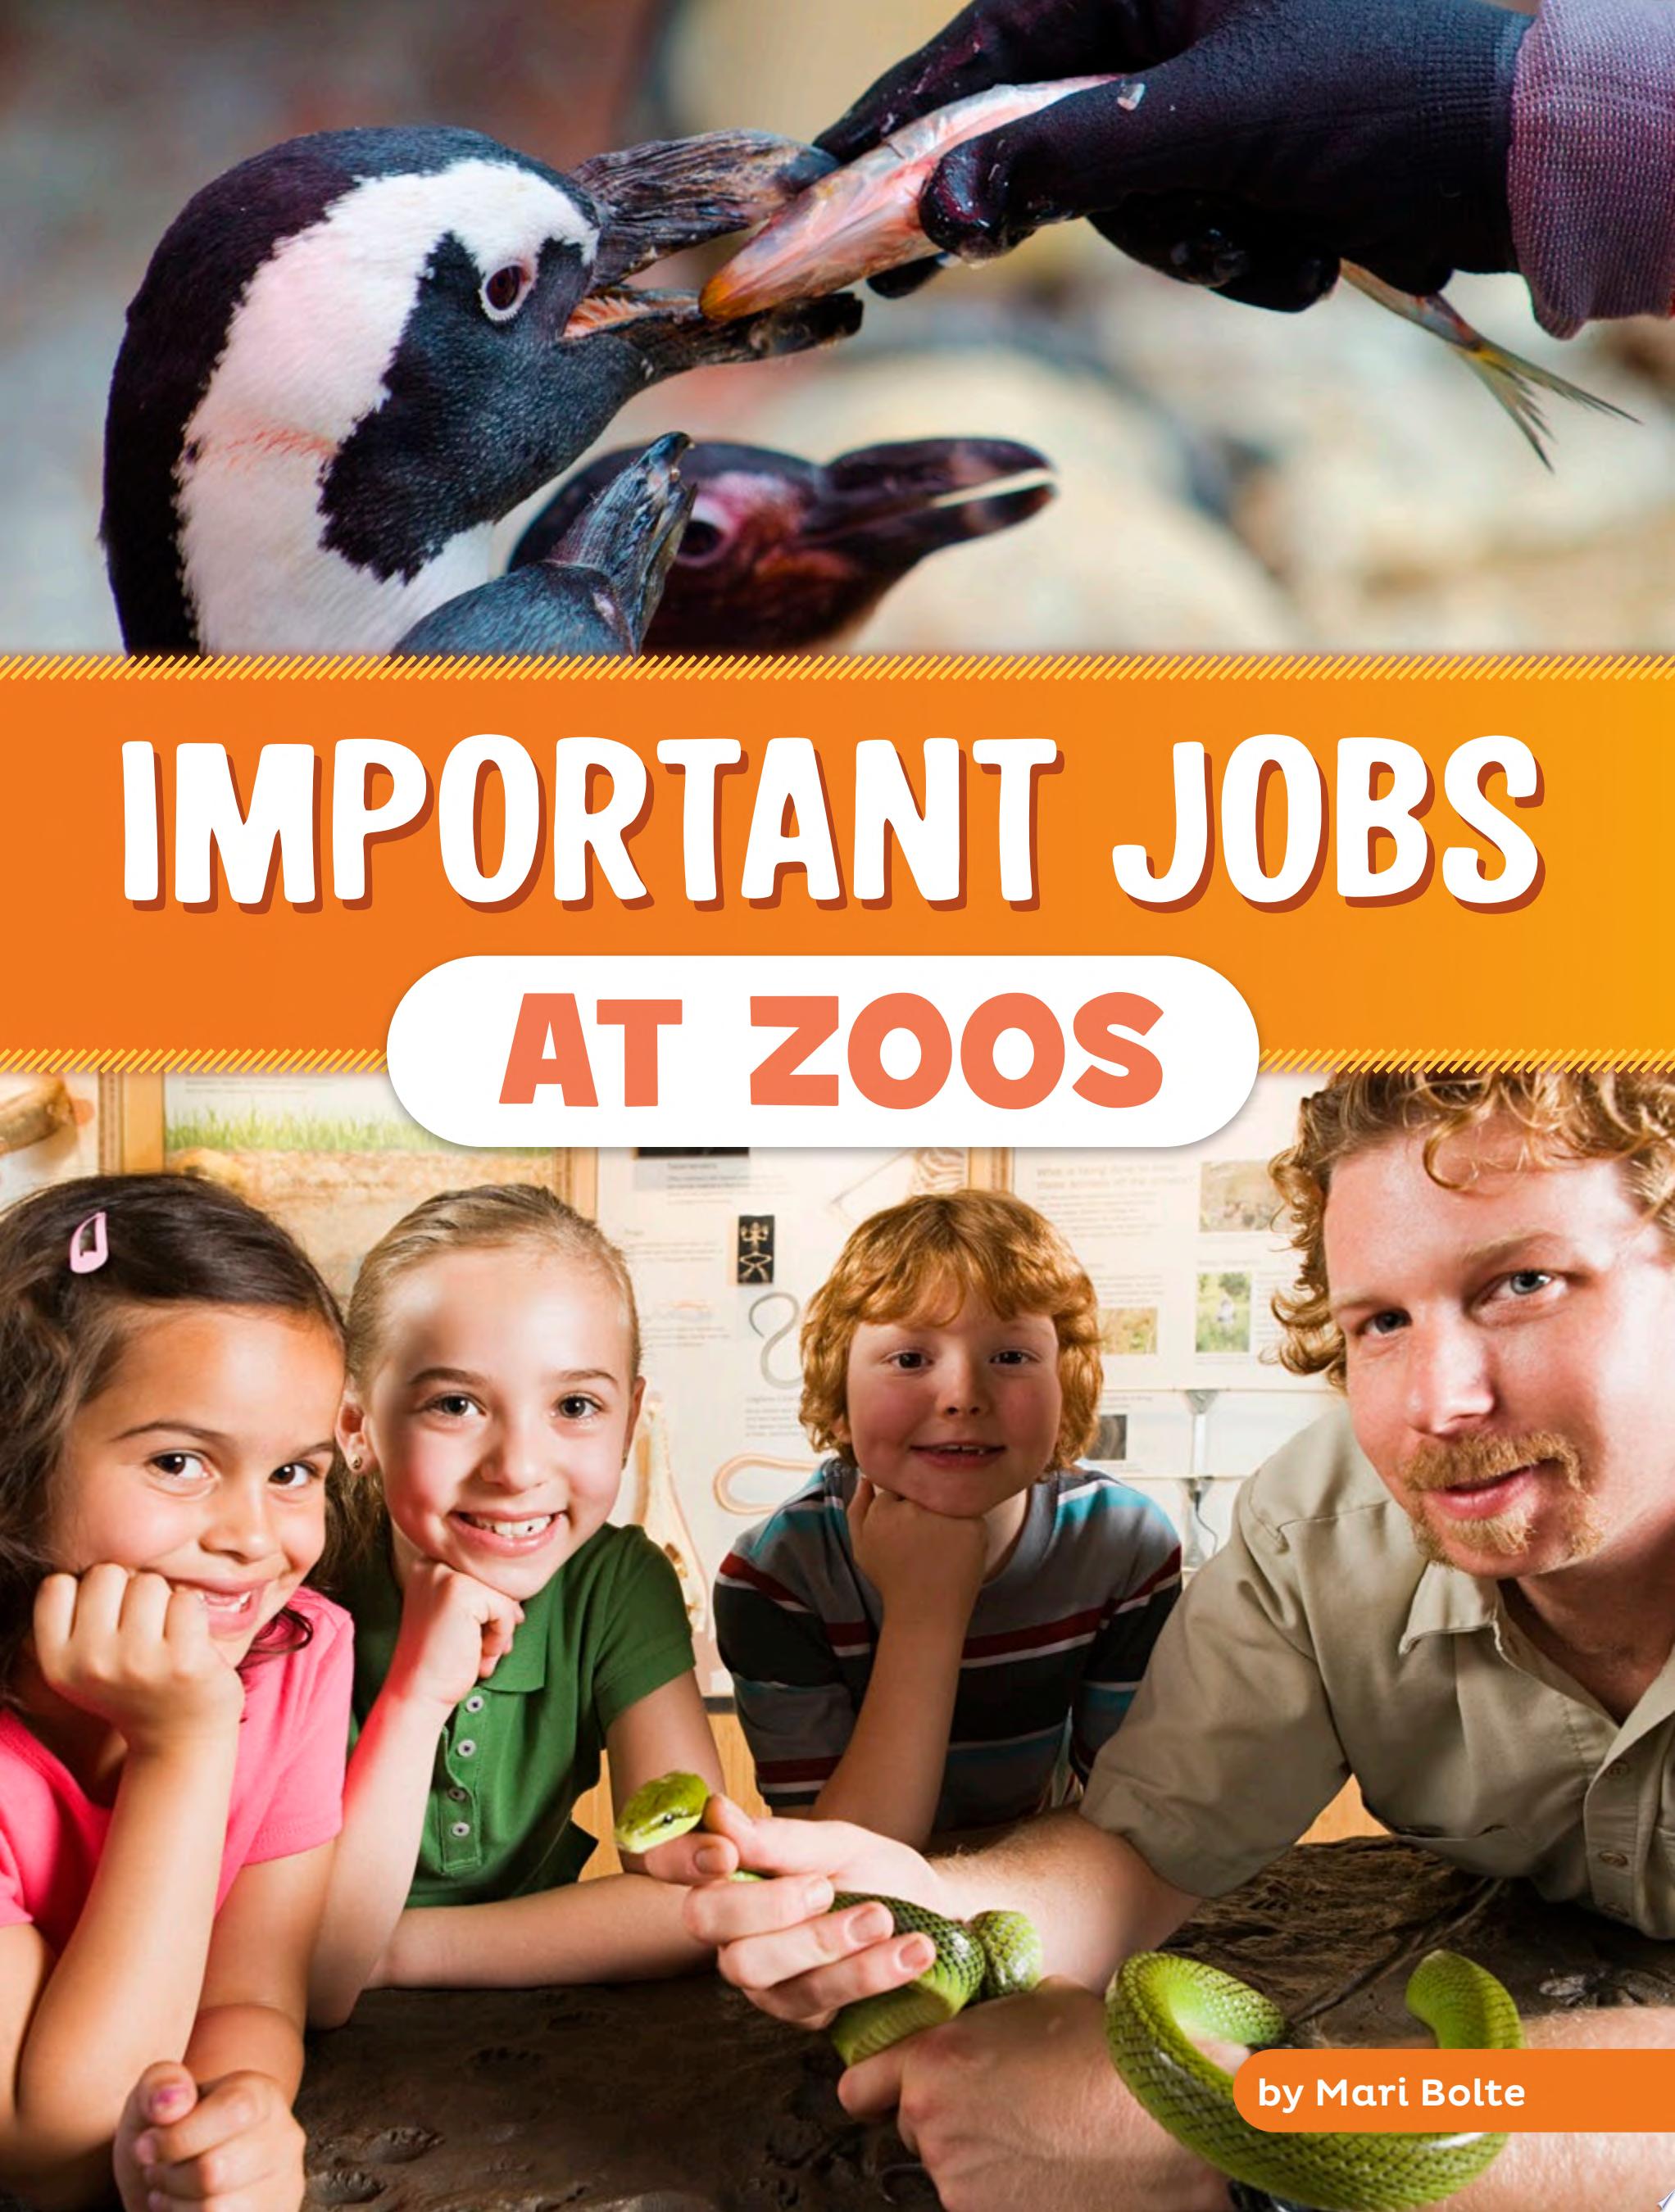 Image for "Important Jobs at Zoos"